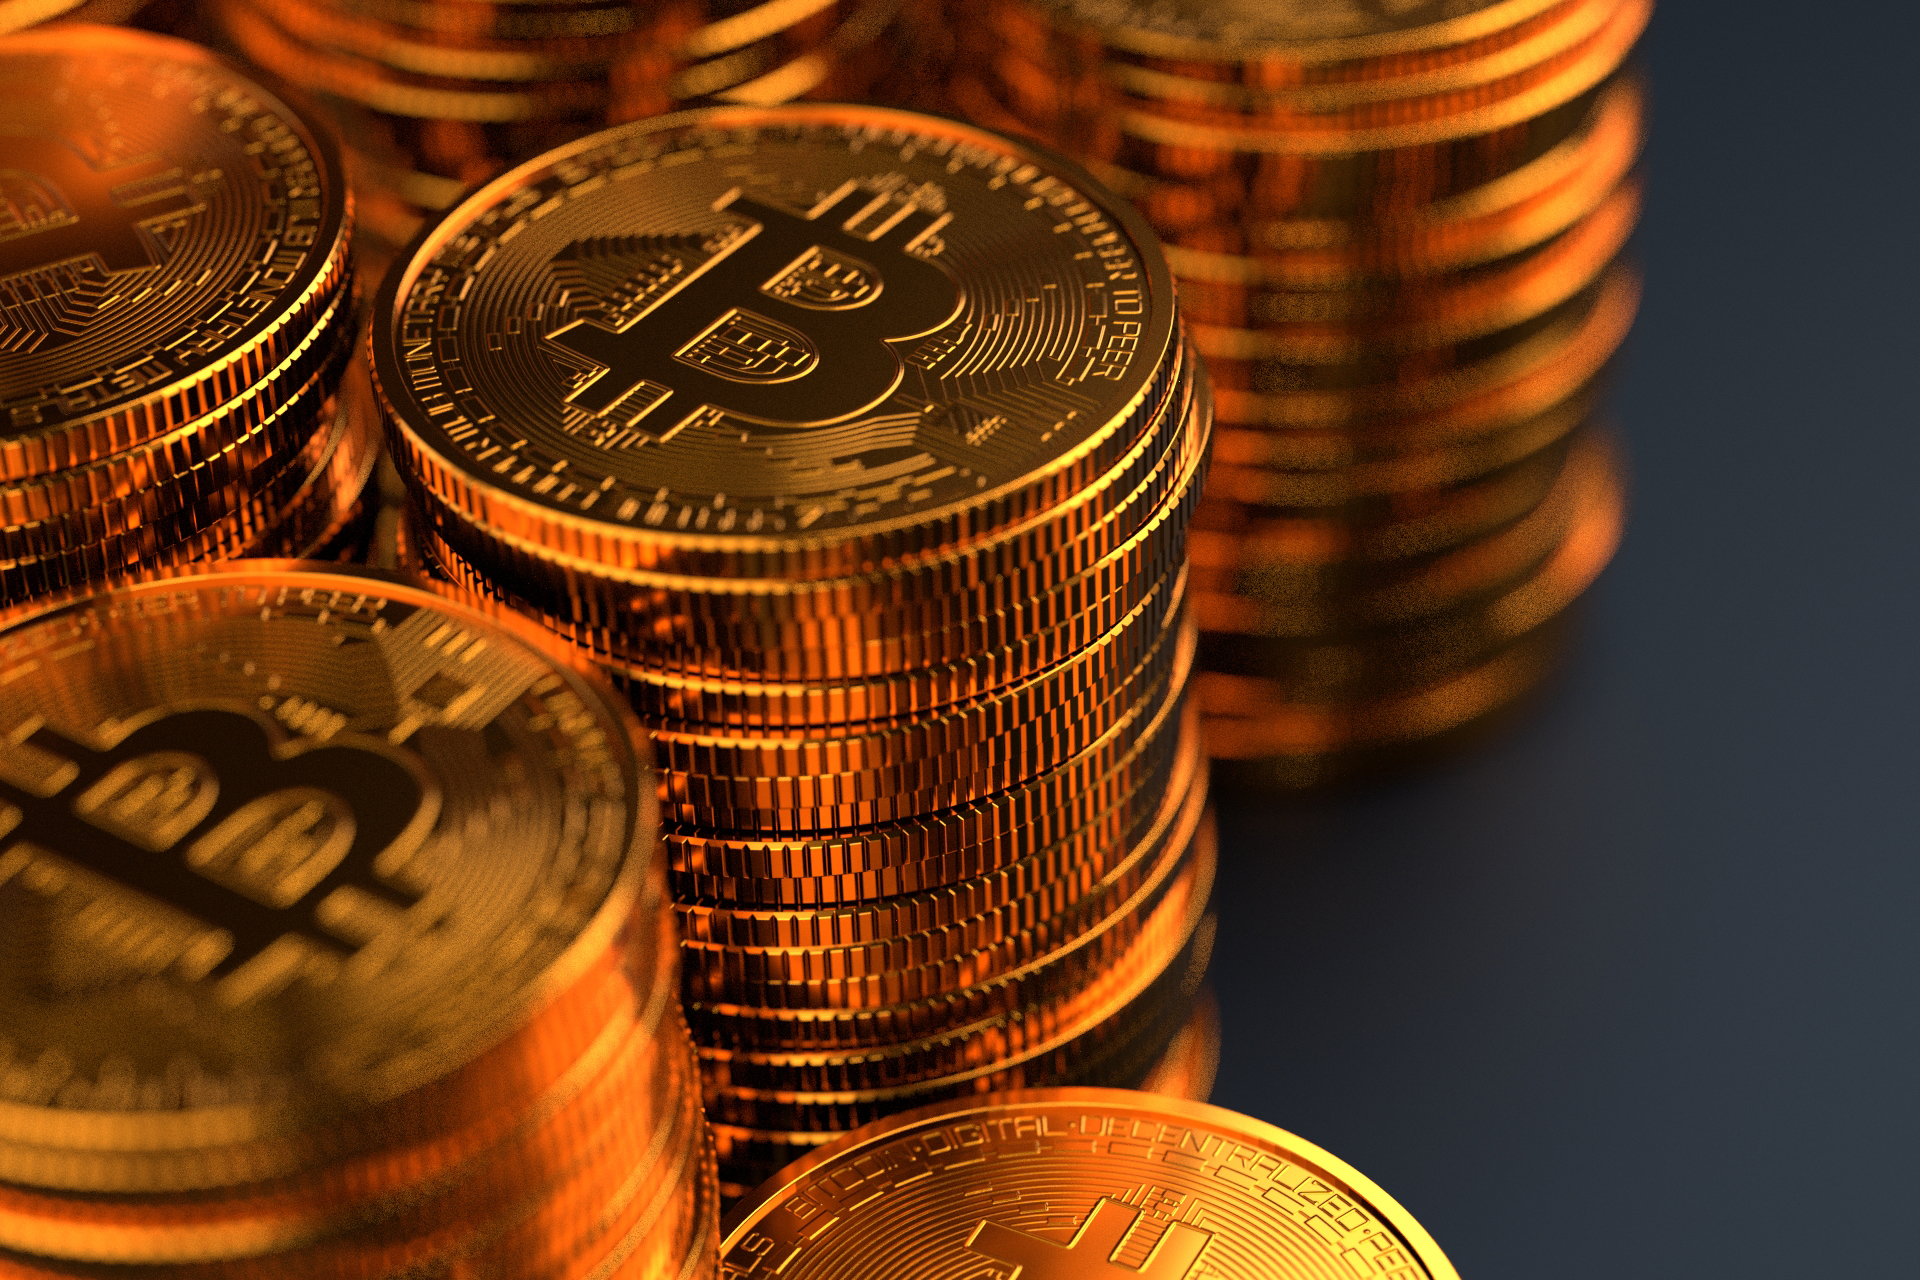 Large stacks of bitcoin free image download